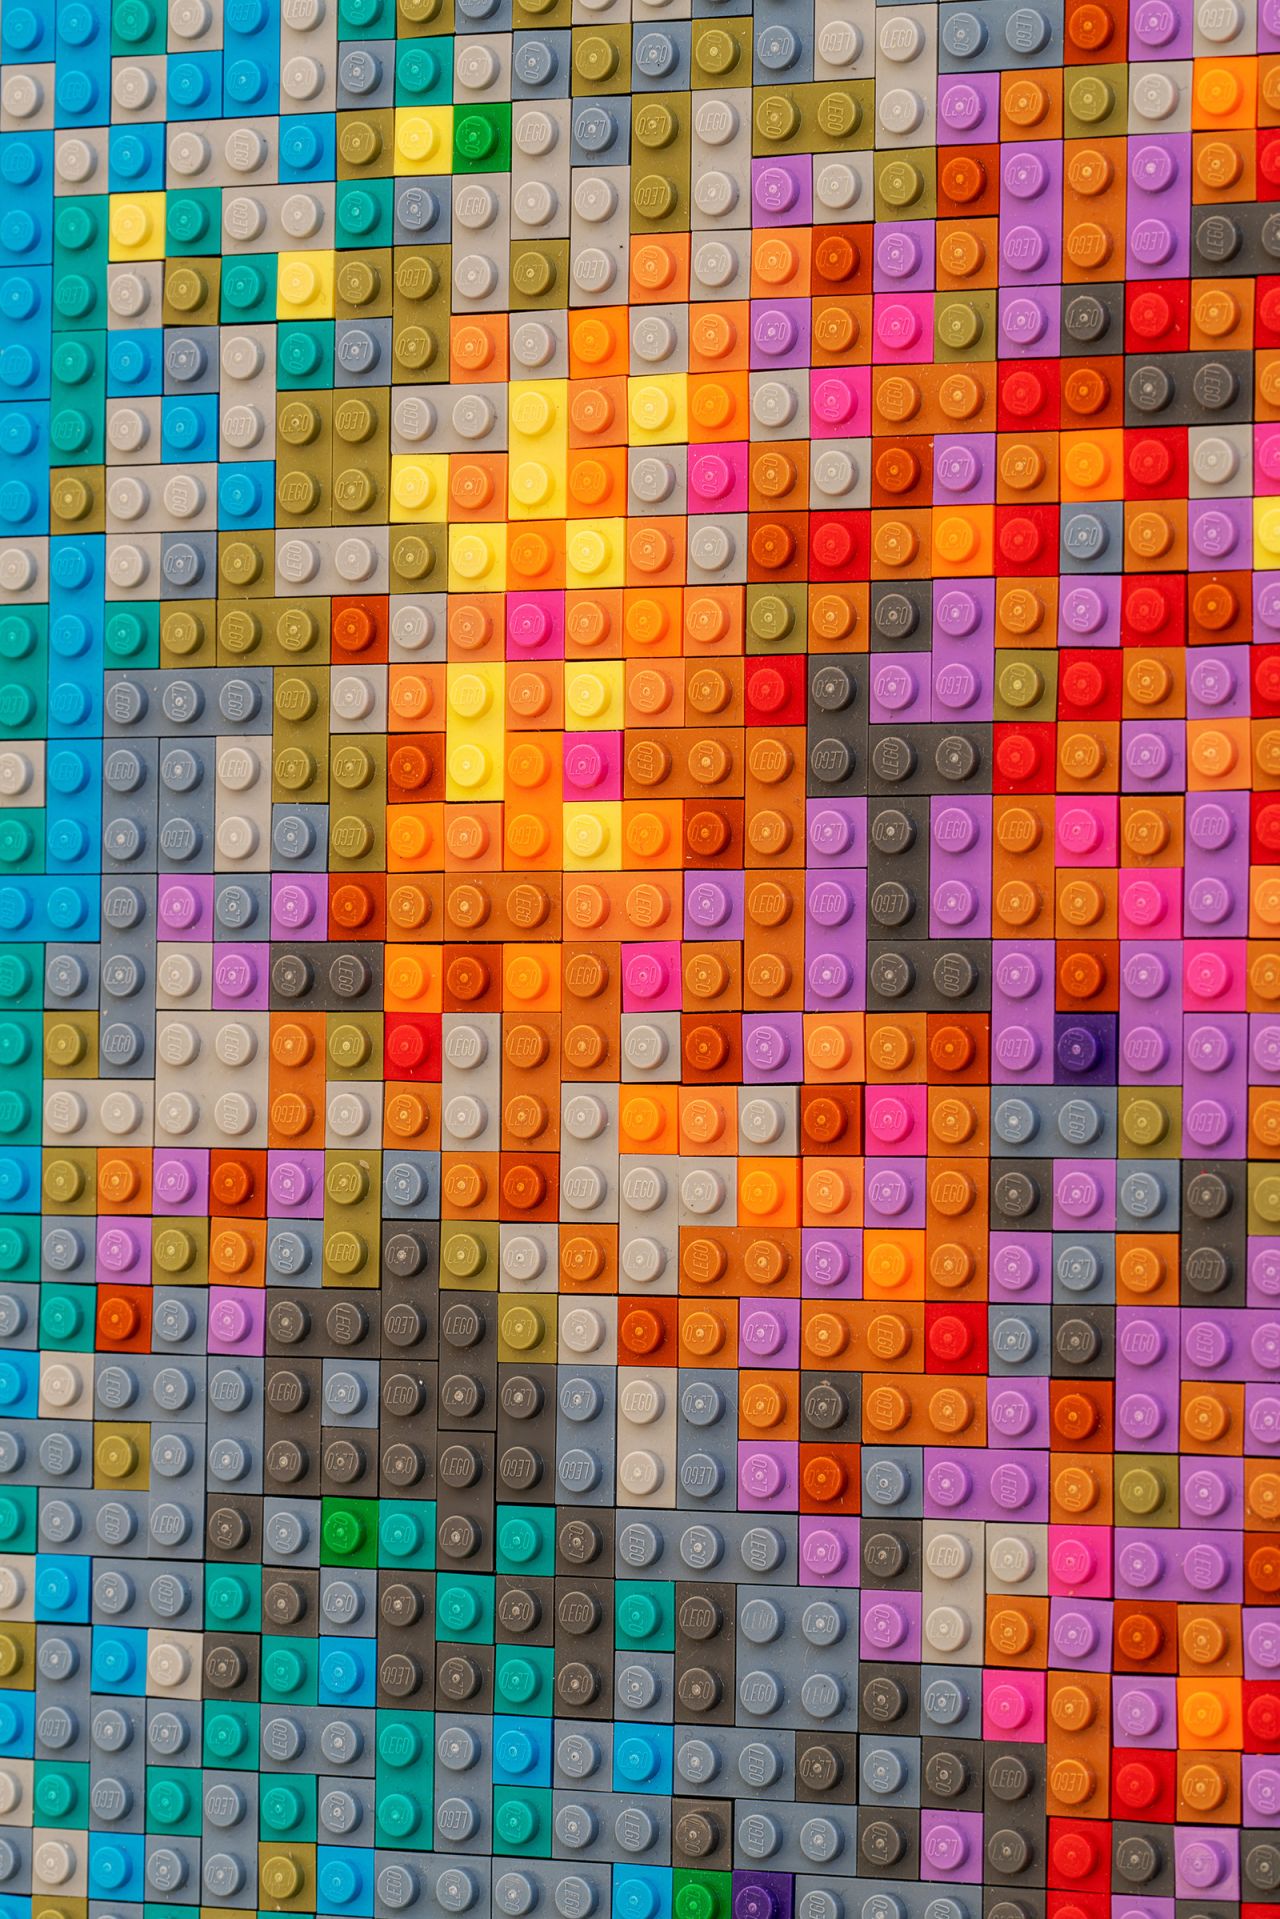 A close up of Water Lilies #1 by Ai Weiwei showing the composition of Lego blocks